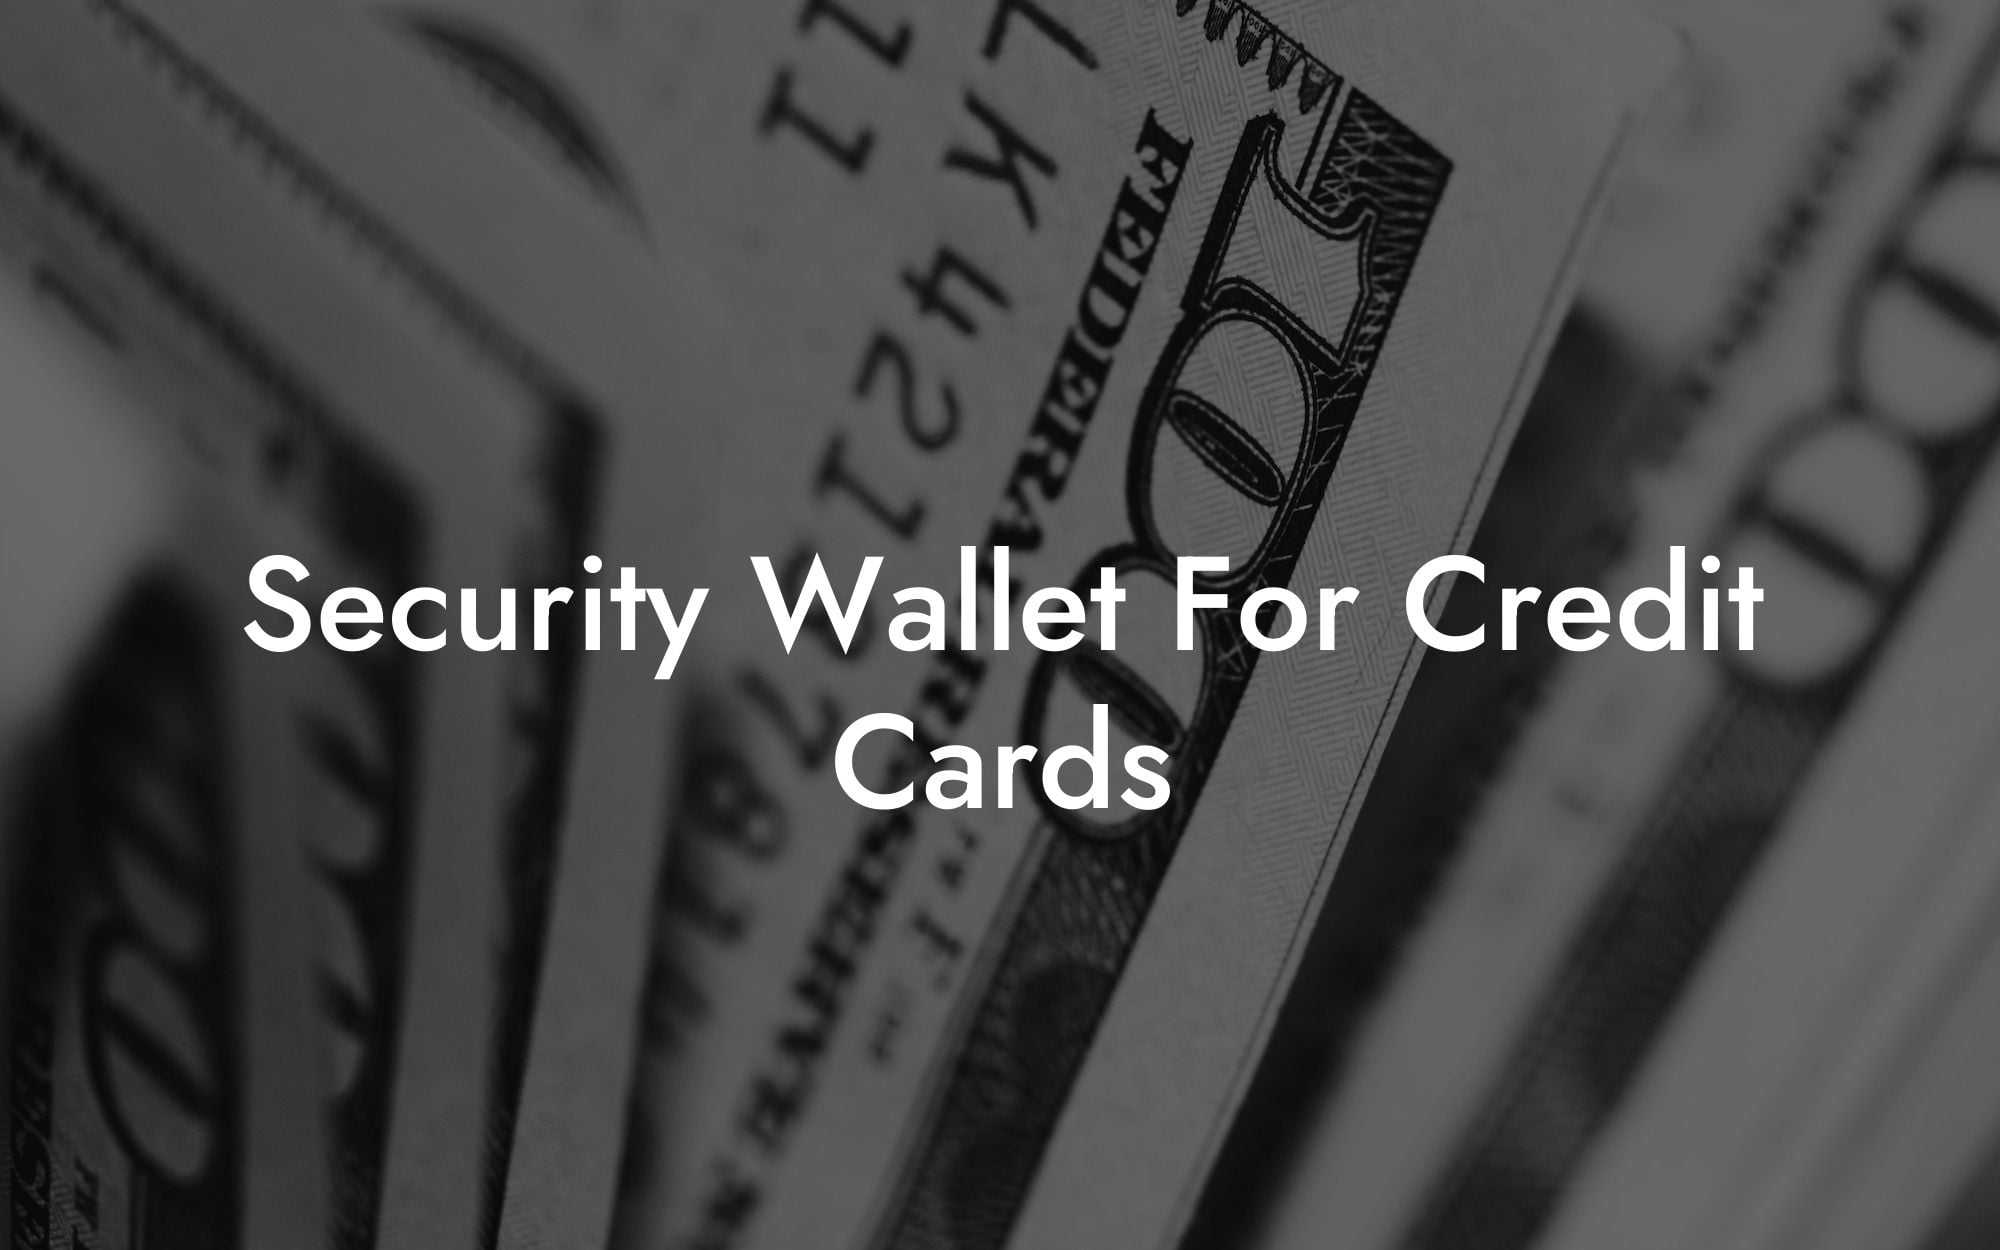 Security Wallet For Credit Cards